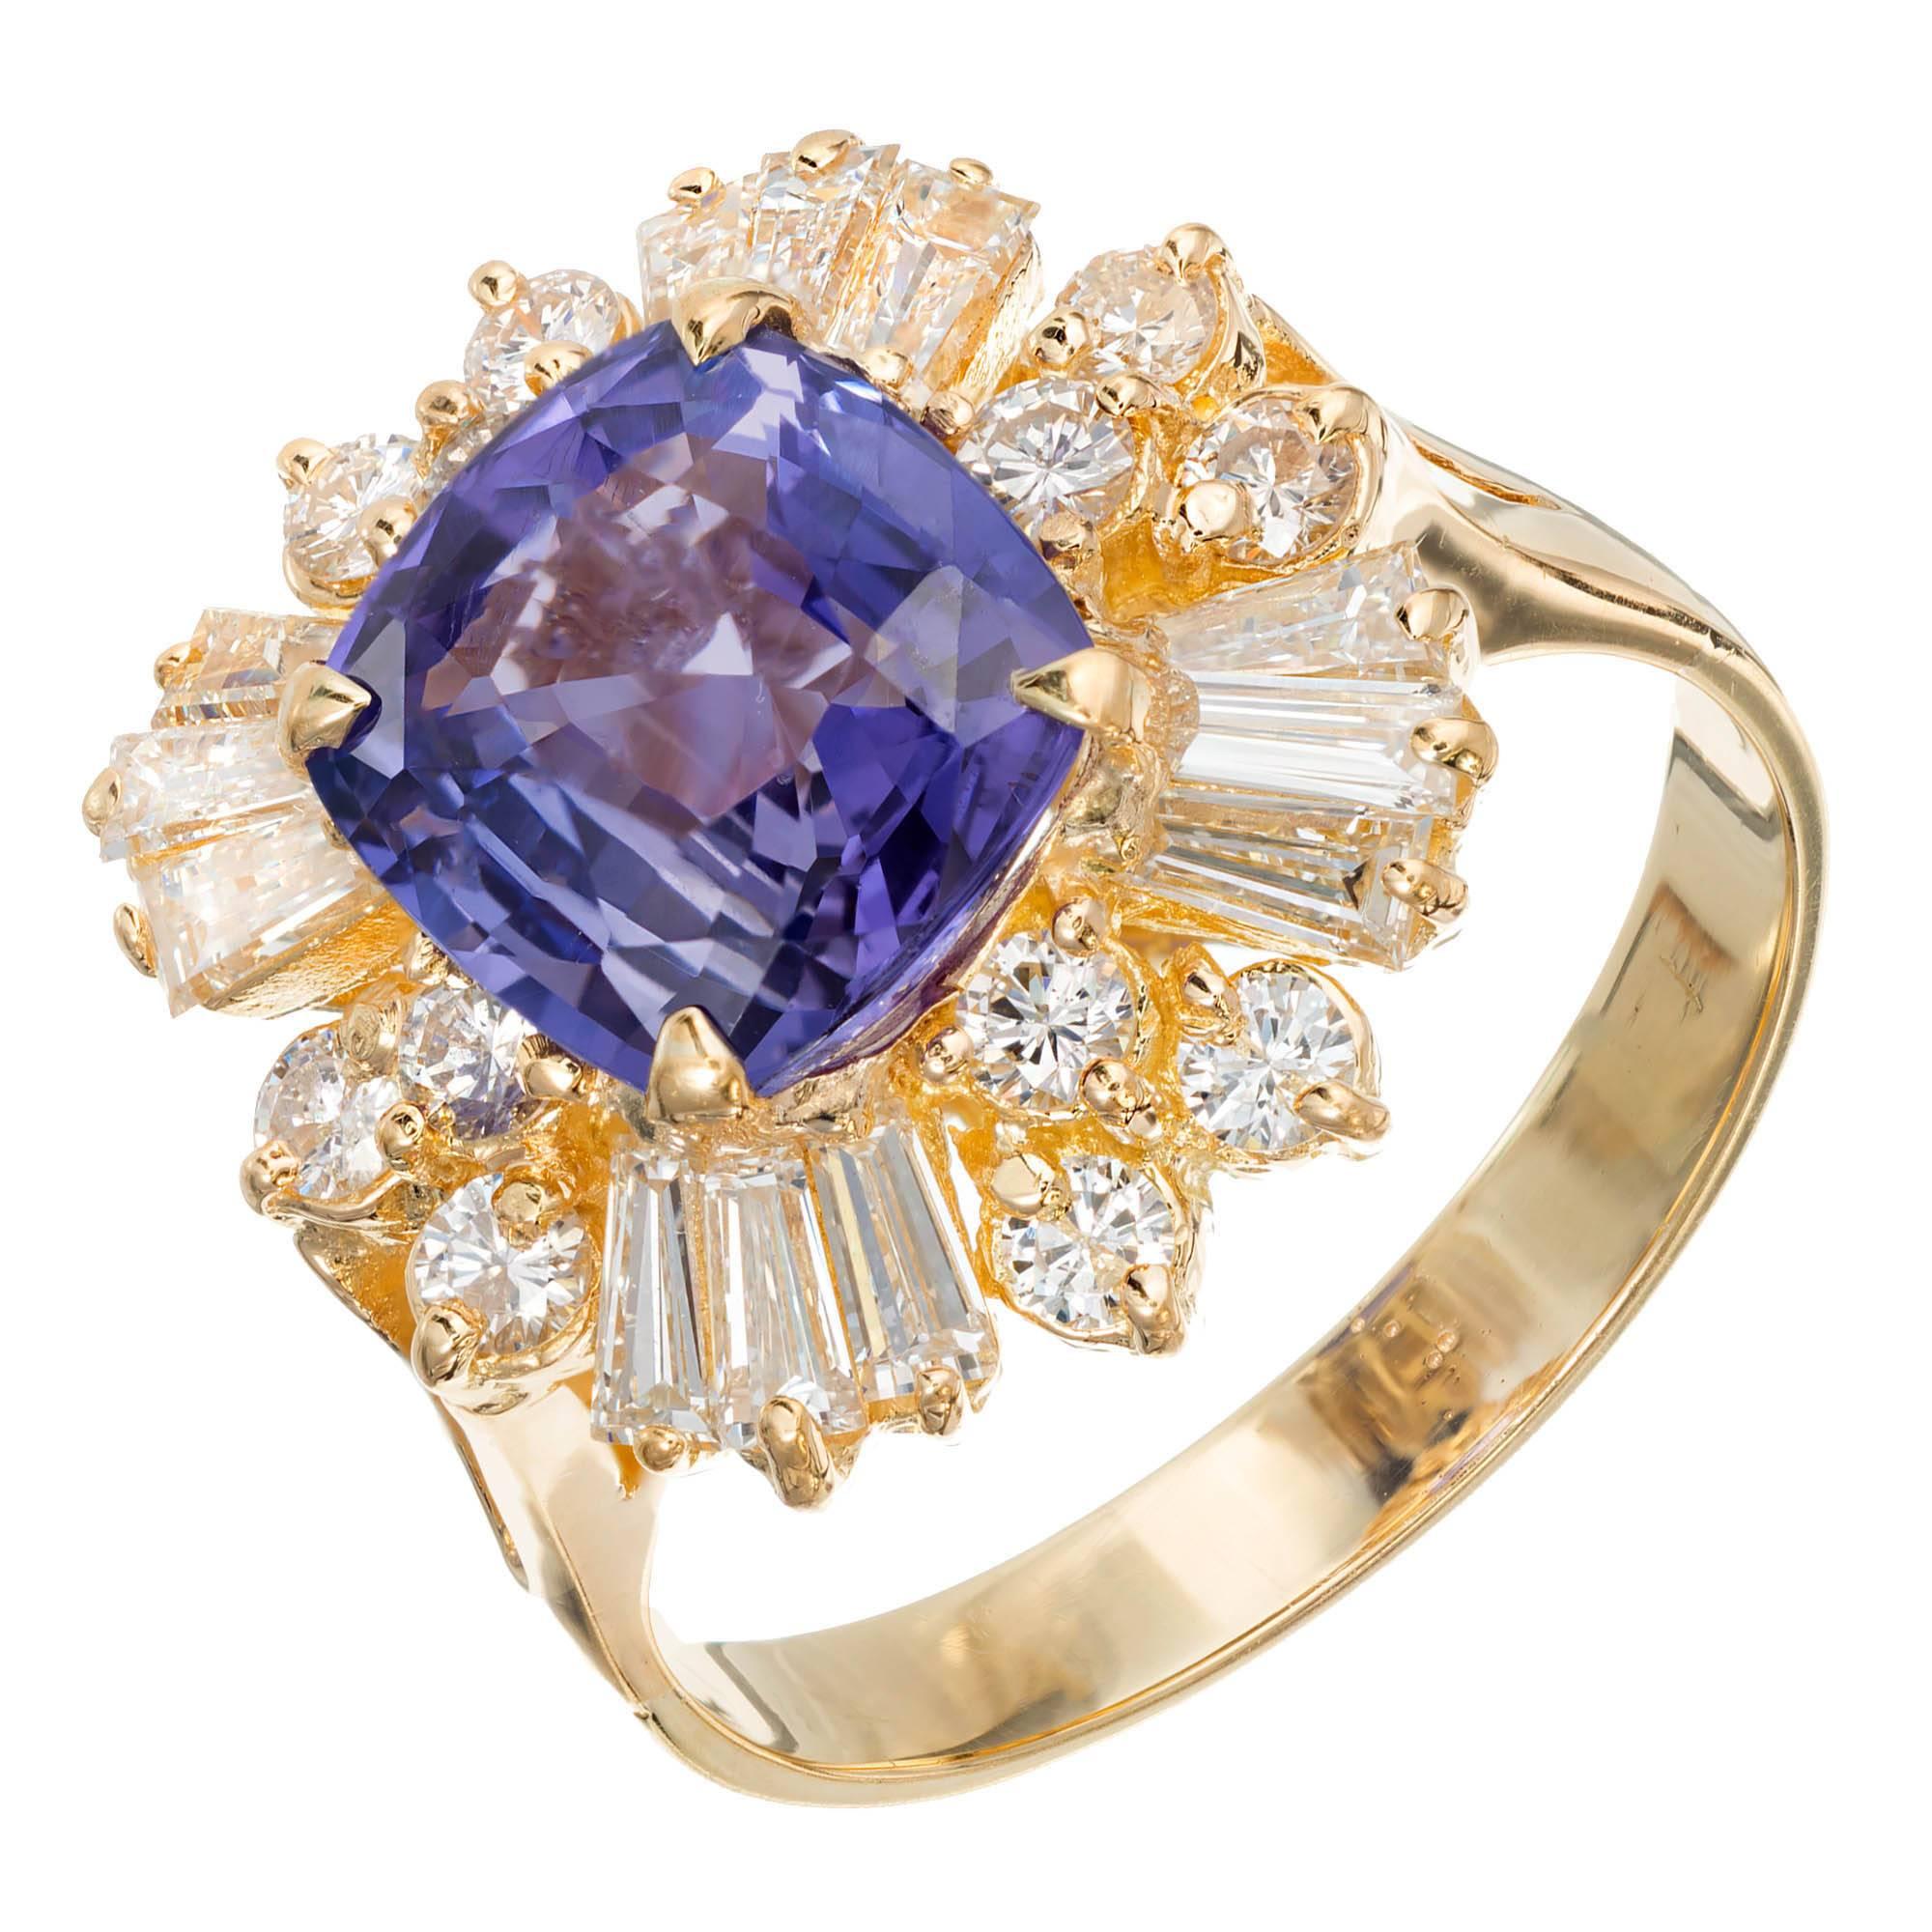 Vintage 1950-1960 Princess style handmade color change sapphire and diamond 18k yellow gold engagement ring. Set with a beautiful GIA certified 3.45 carat cushion cut sapphire that changes color from violet to purple. Round and baguette diamond halo